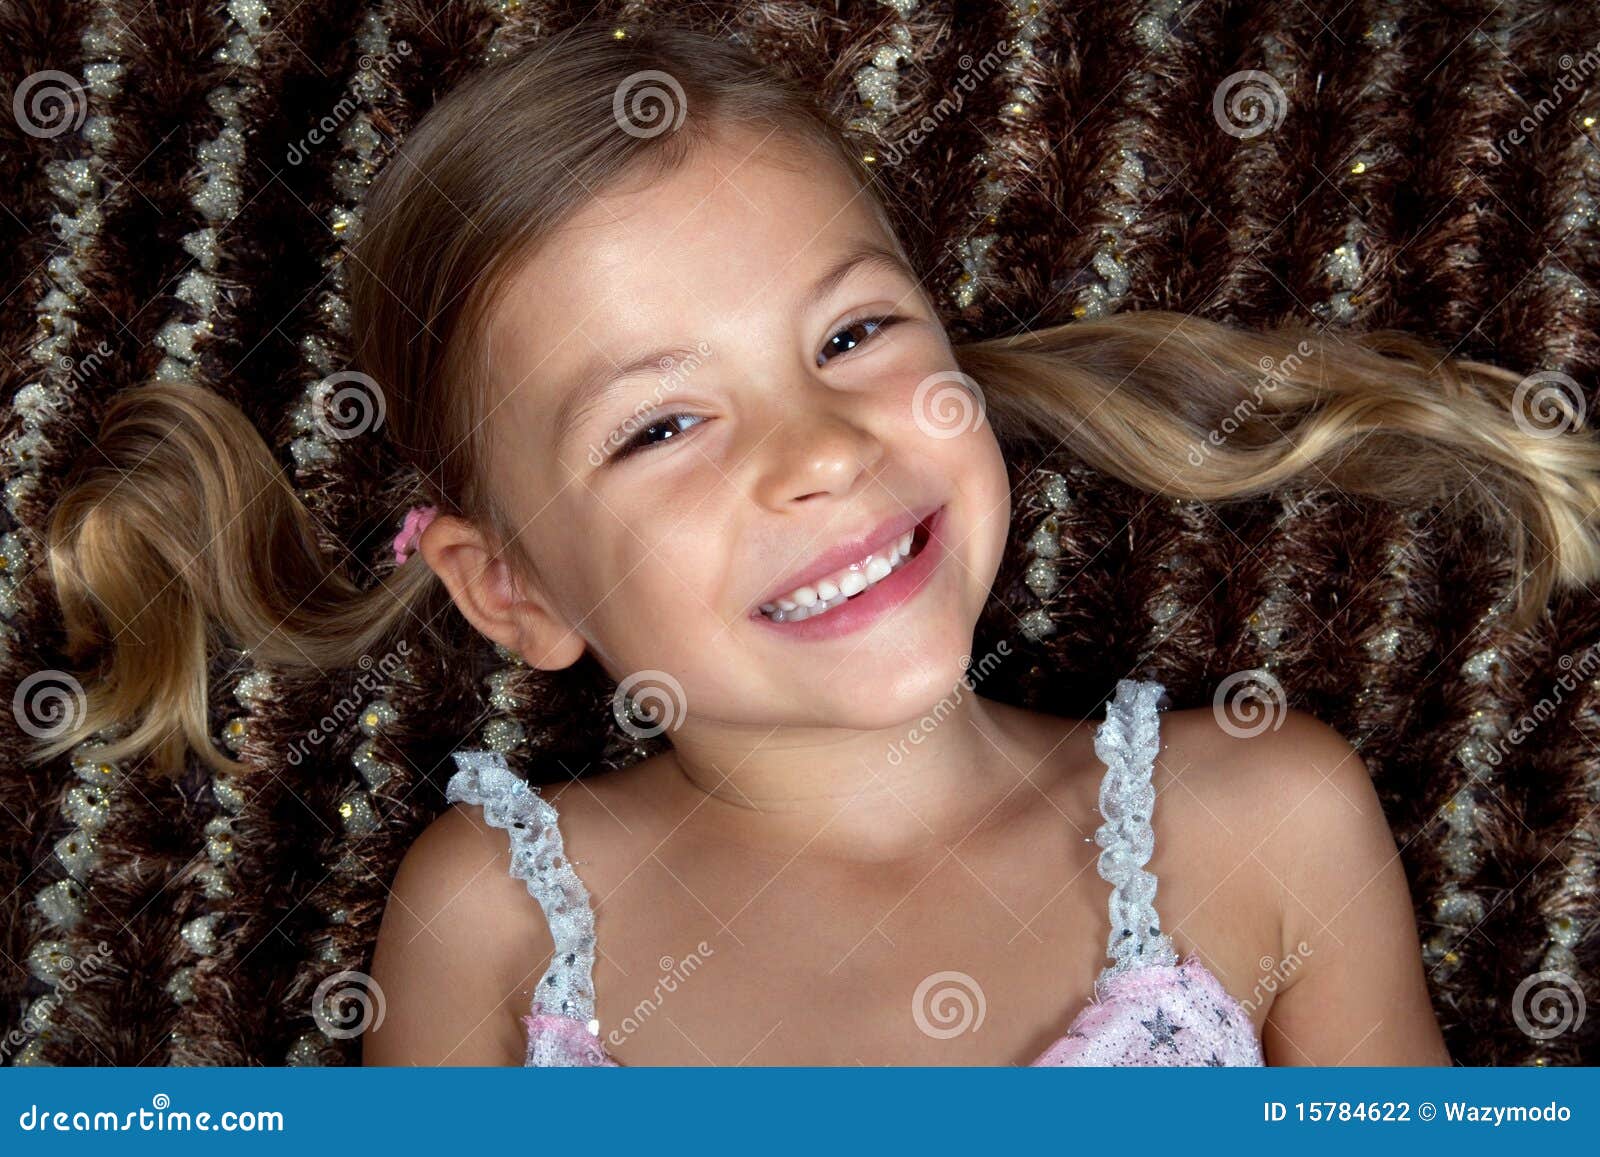 little girl lying down on a rug and smiling